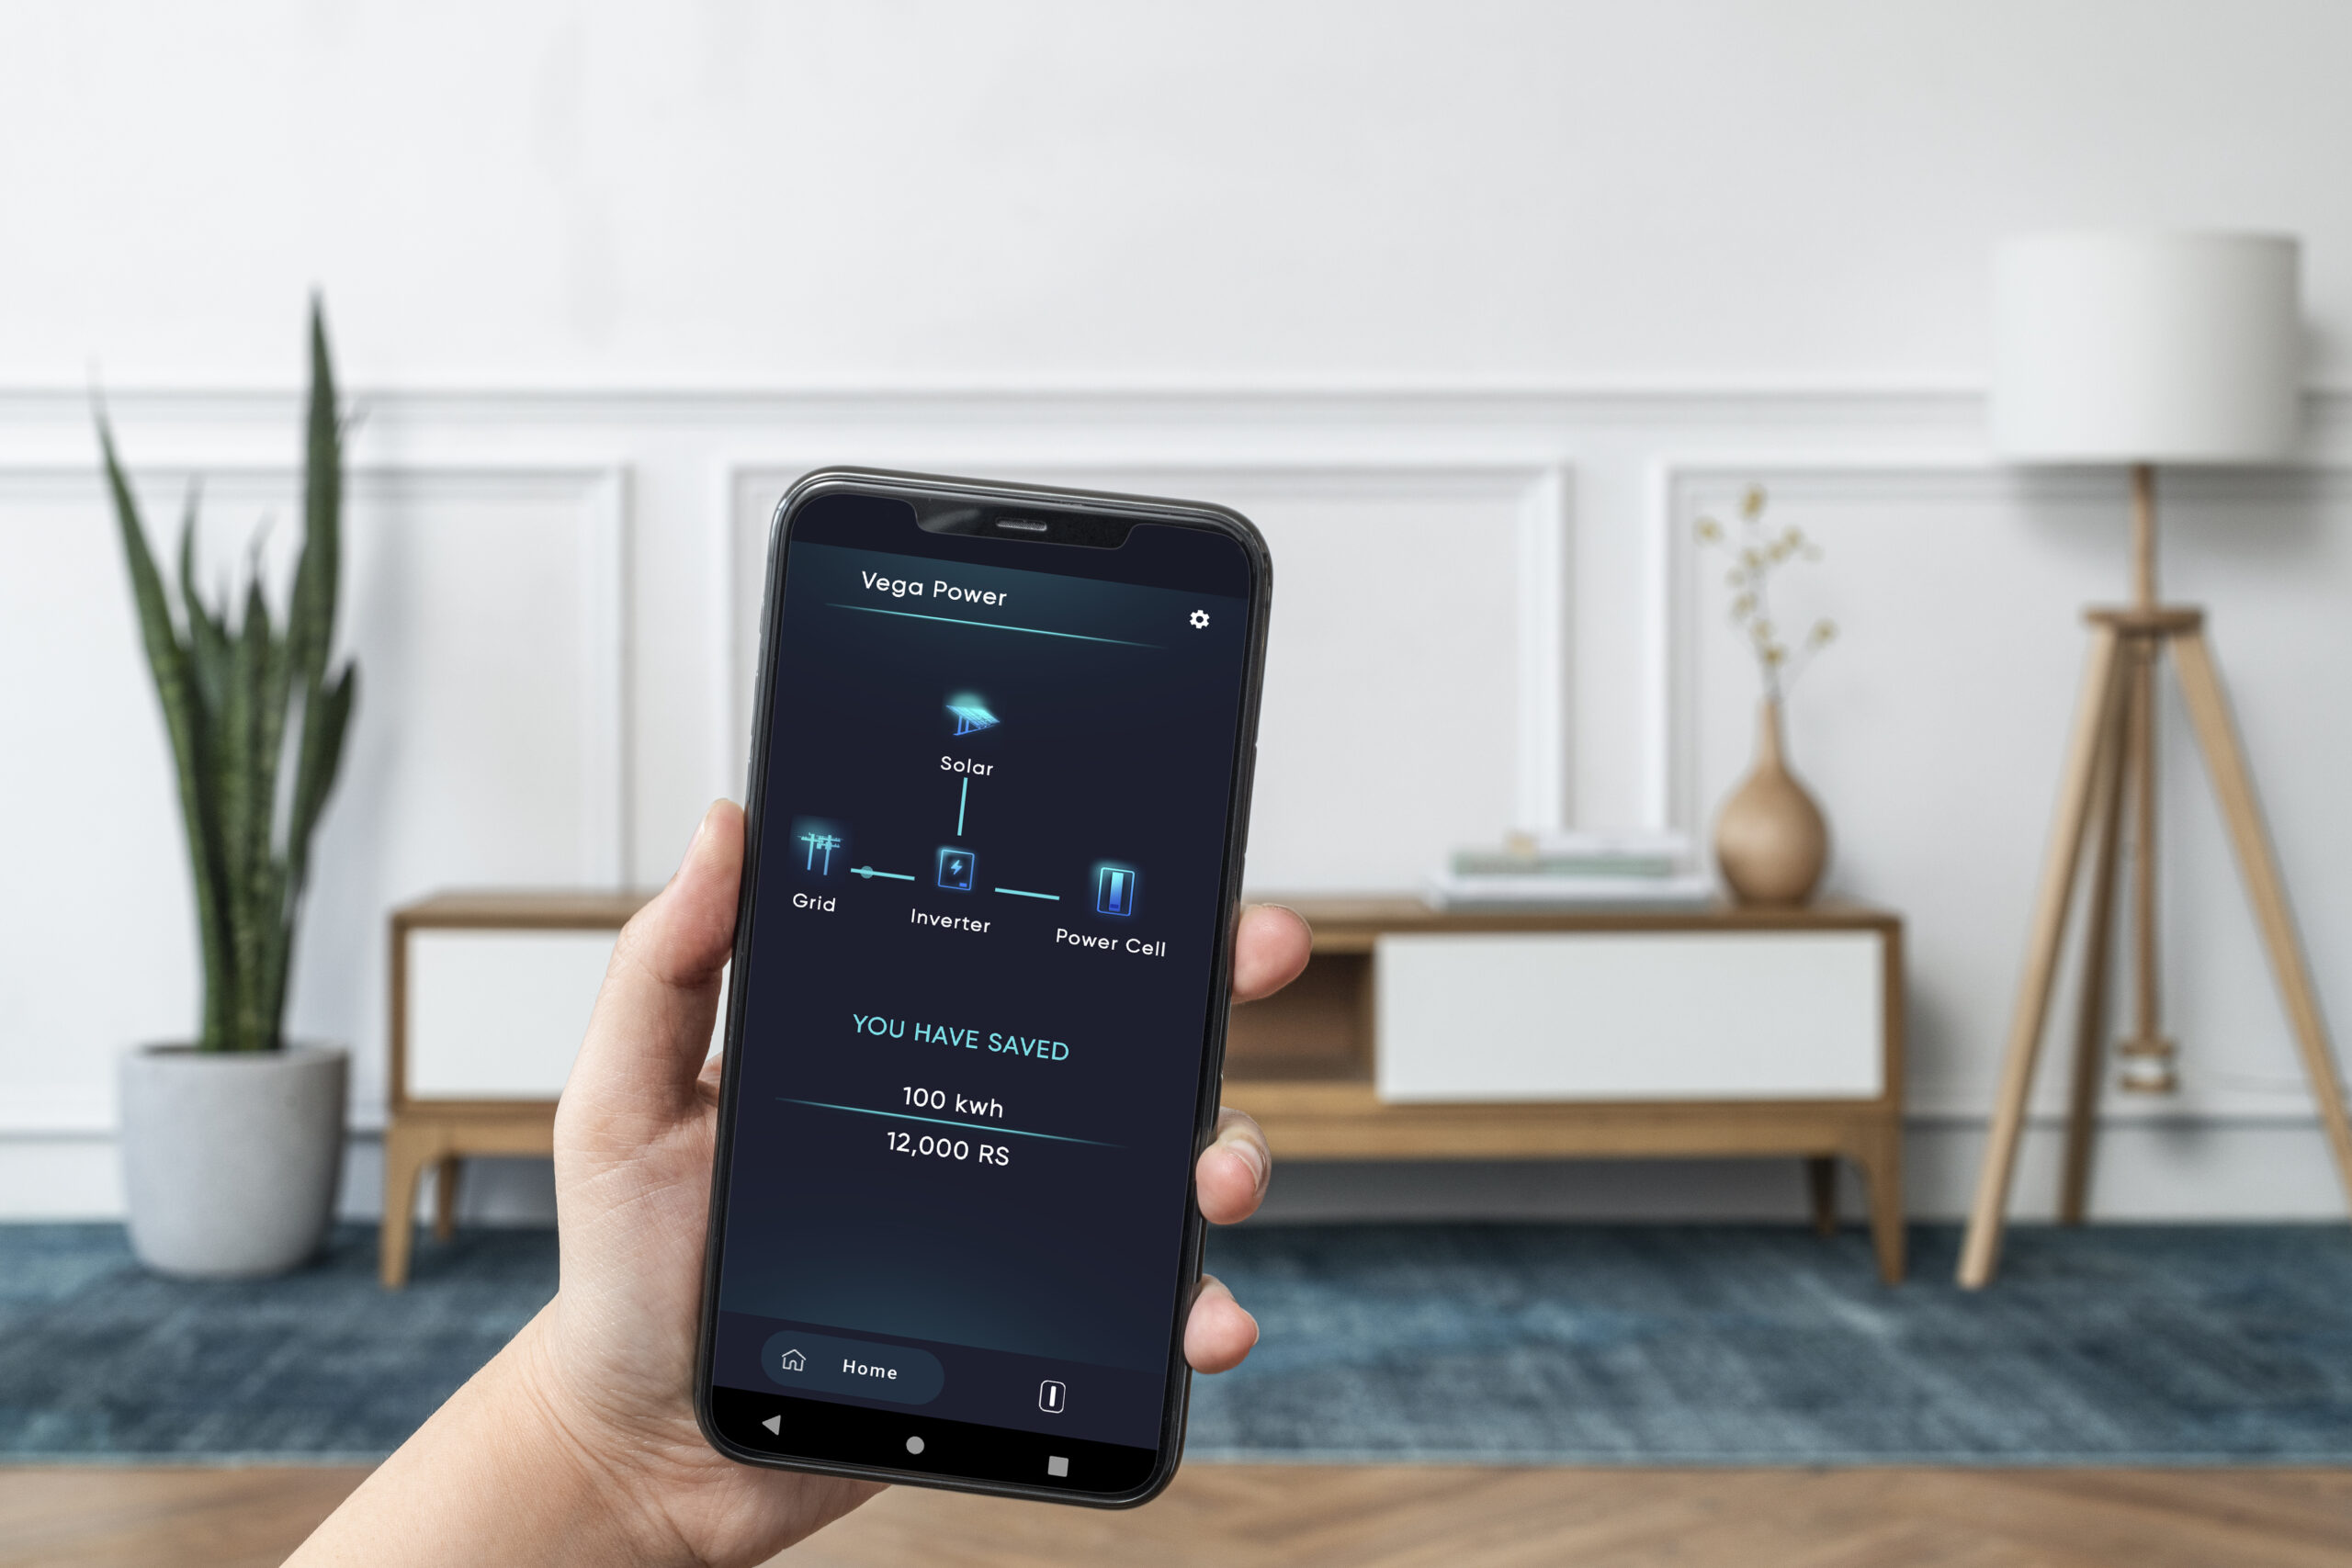 Smart home system mockup psd on mobile phone screen